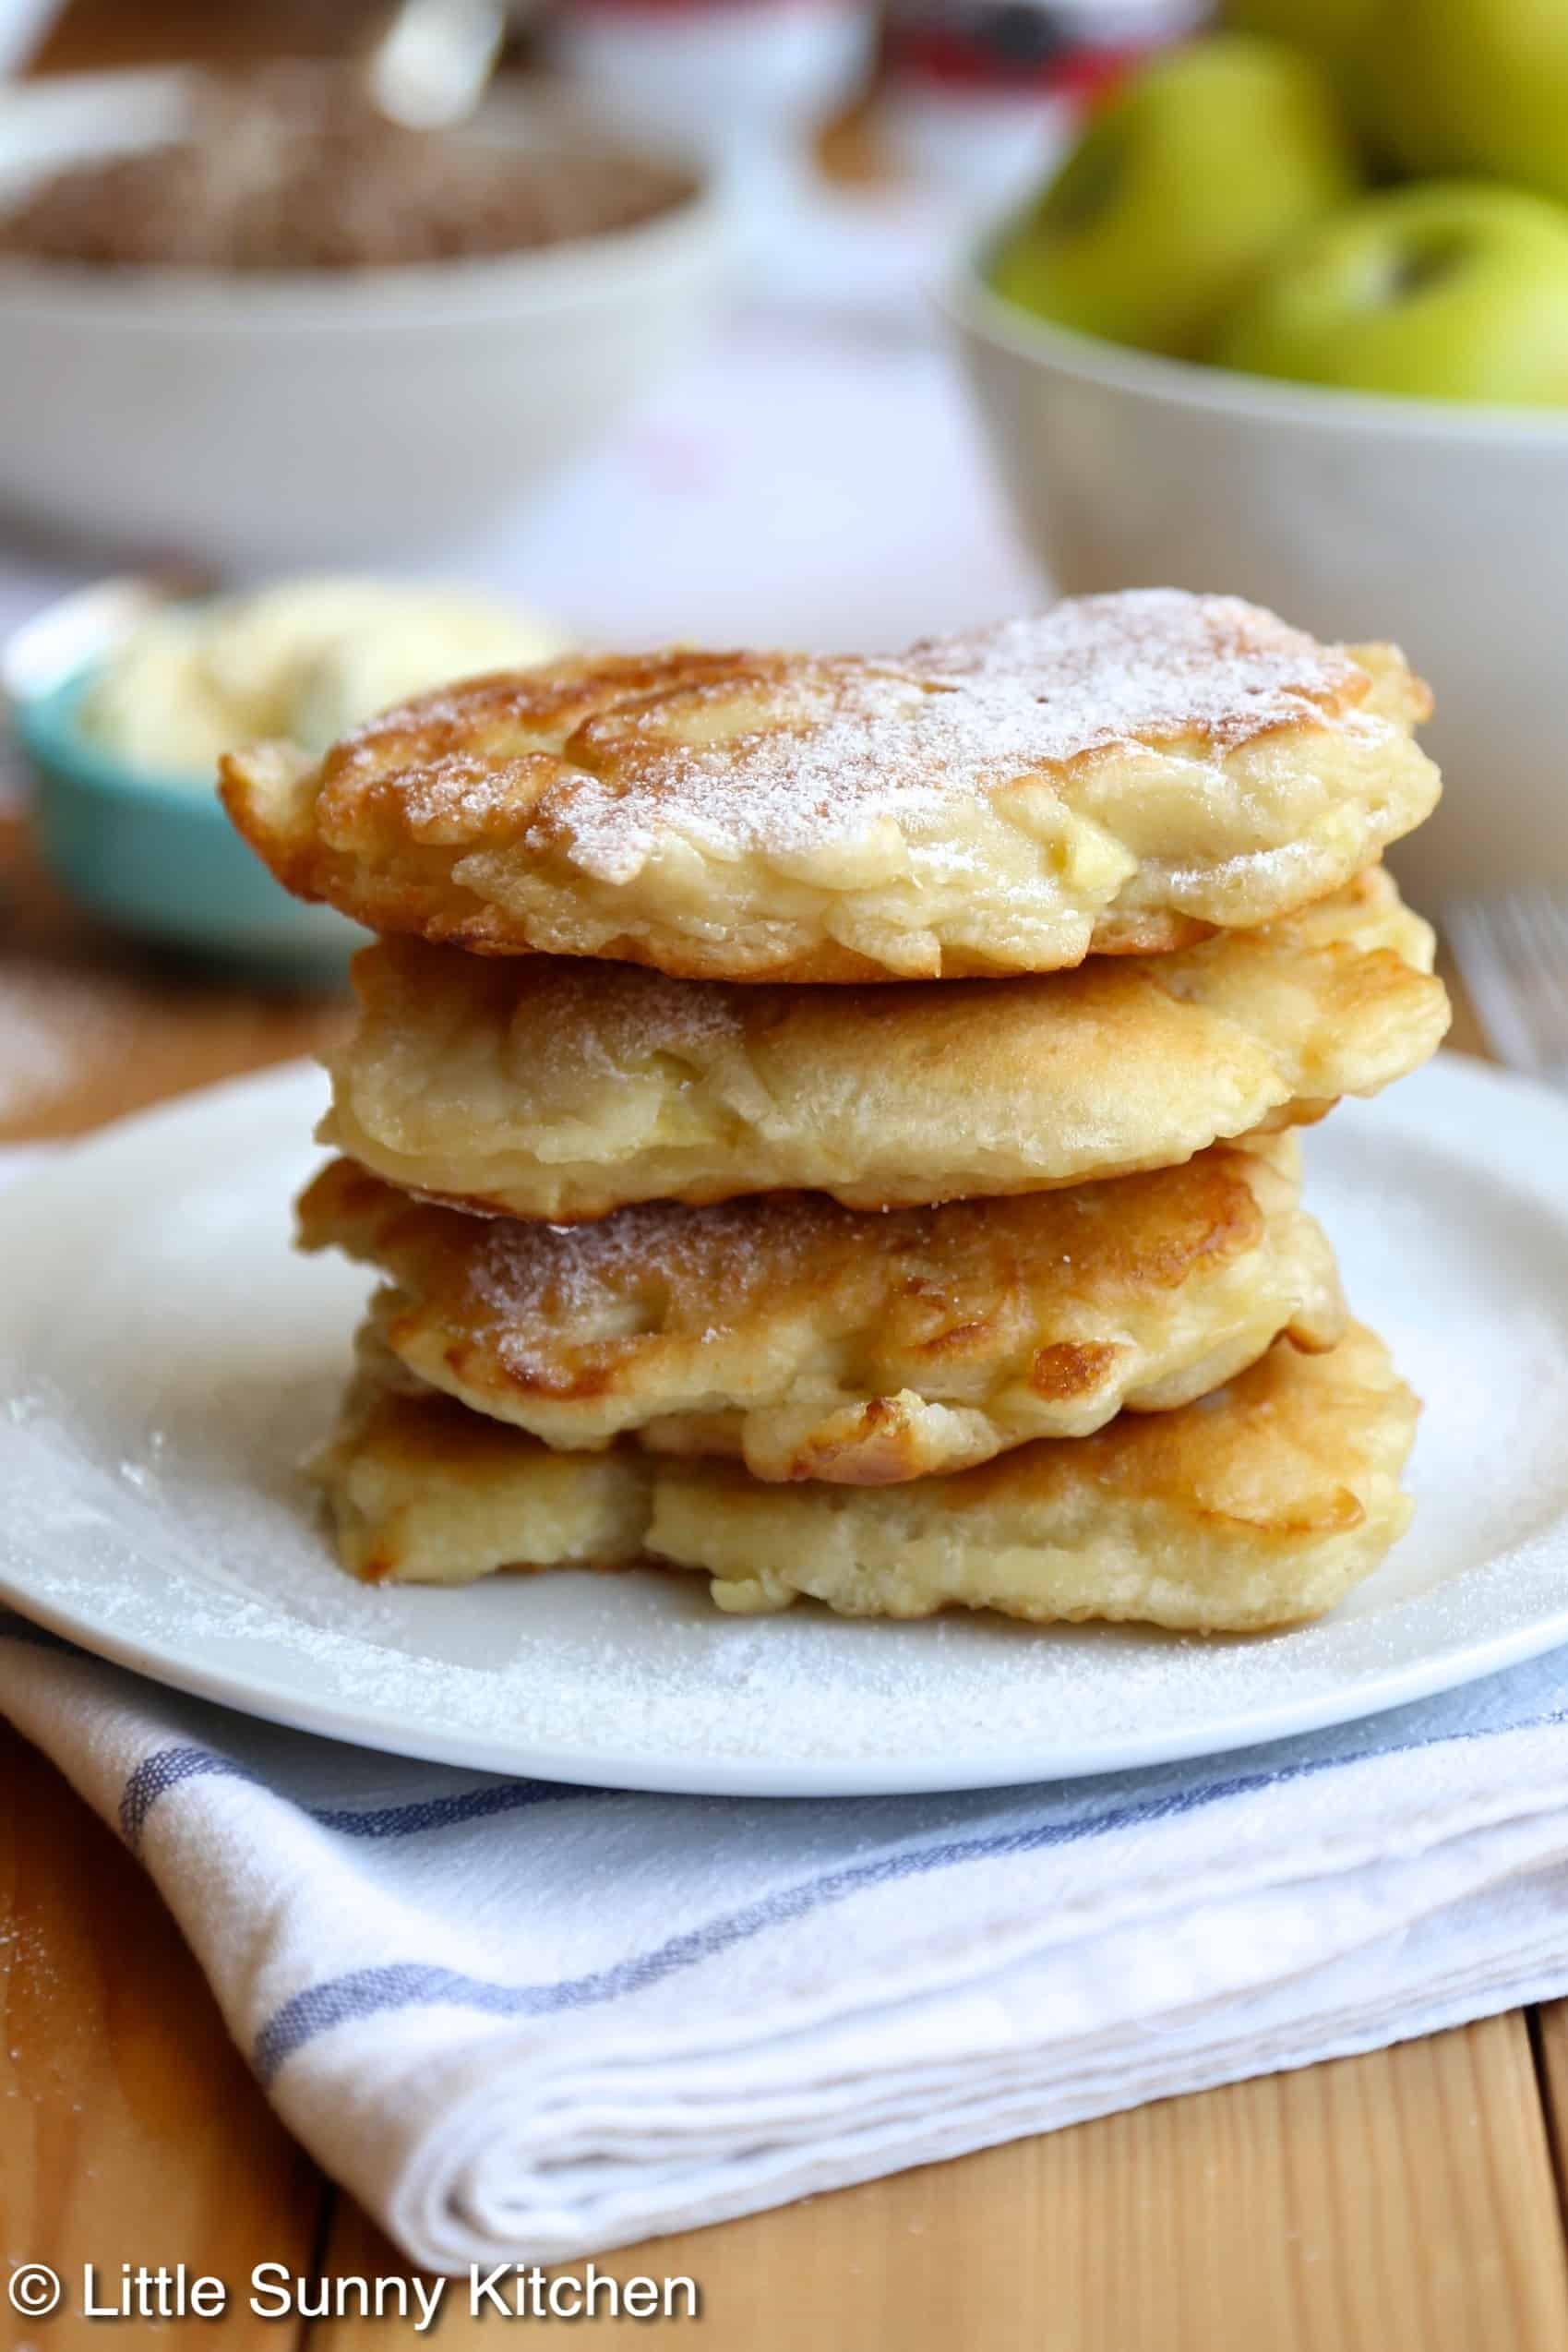 Polish apple pancakes made of apples dipped into pancake batter, then fried in butter and topped with powdered sugar or a sweet syrup of your choice!